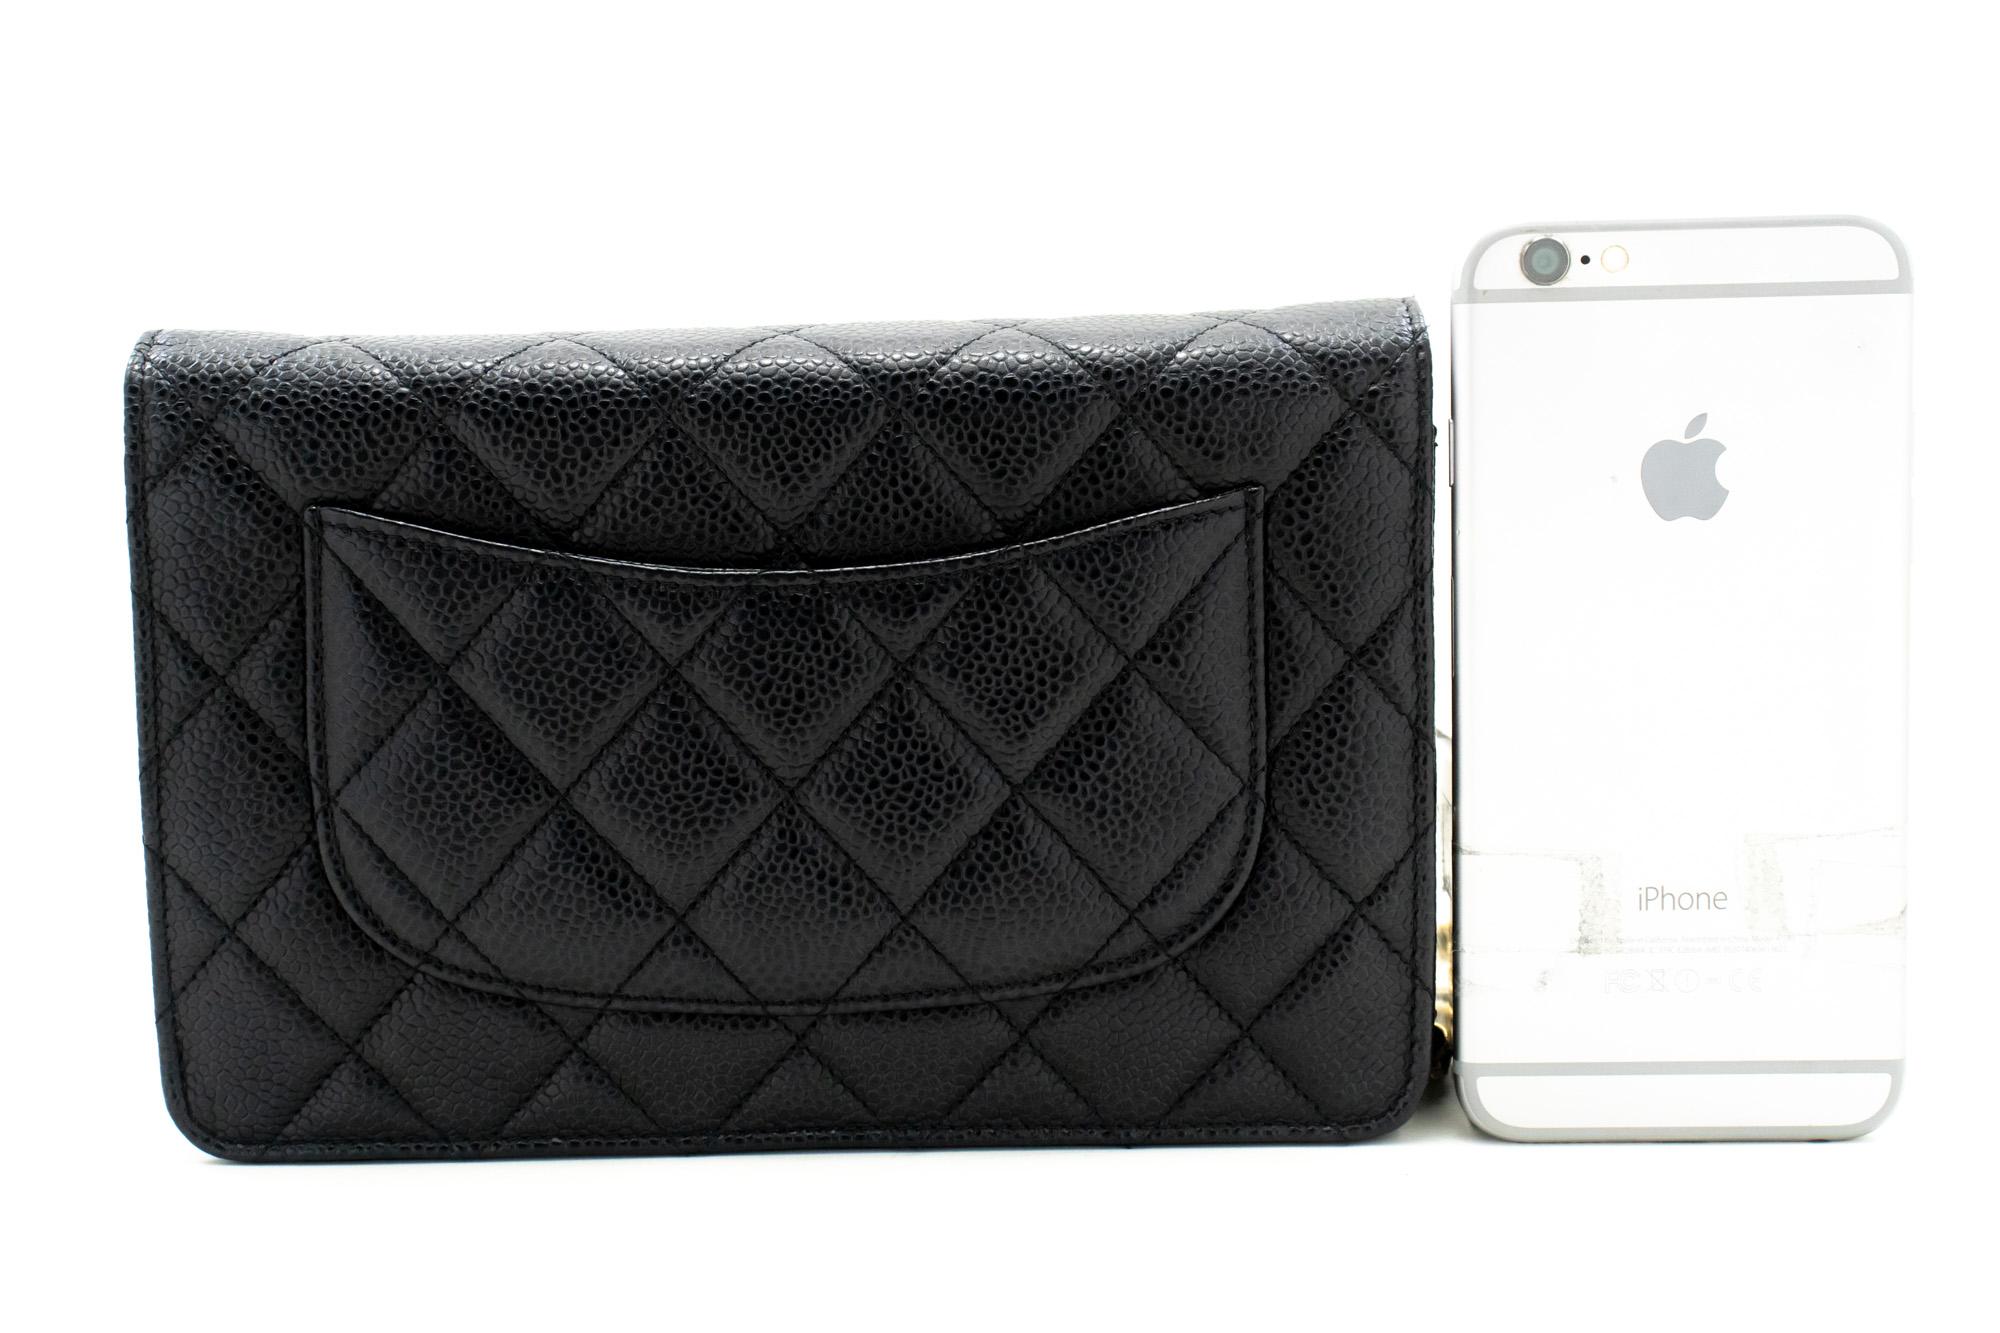 CHANEL Caviar WOC Wallet On Chain Black Shoulder Crossbody Bag In Good Condition For Sale In Takamatsu-shi, JP